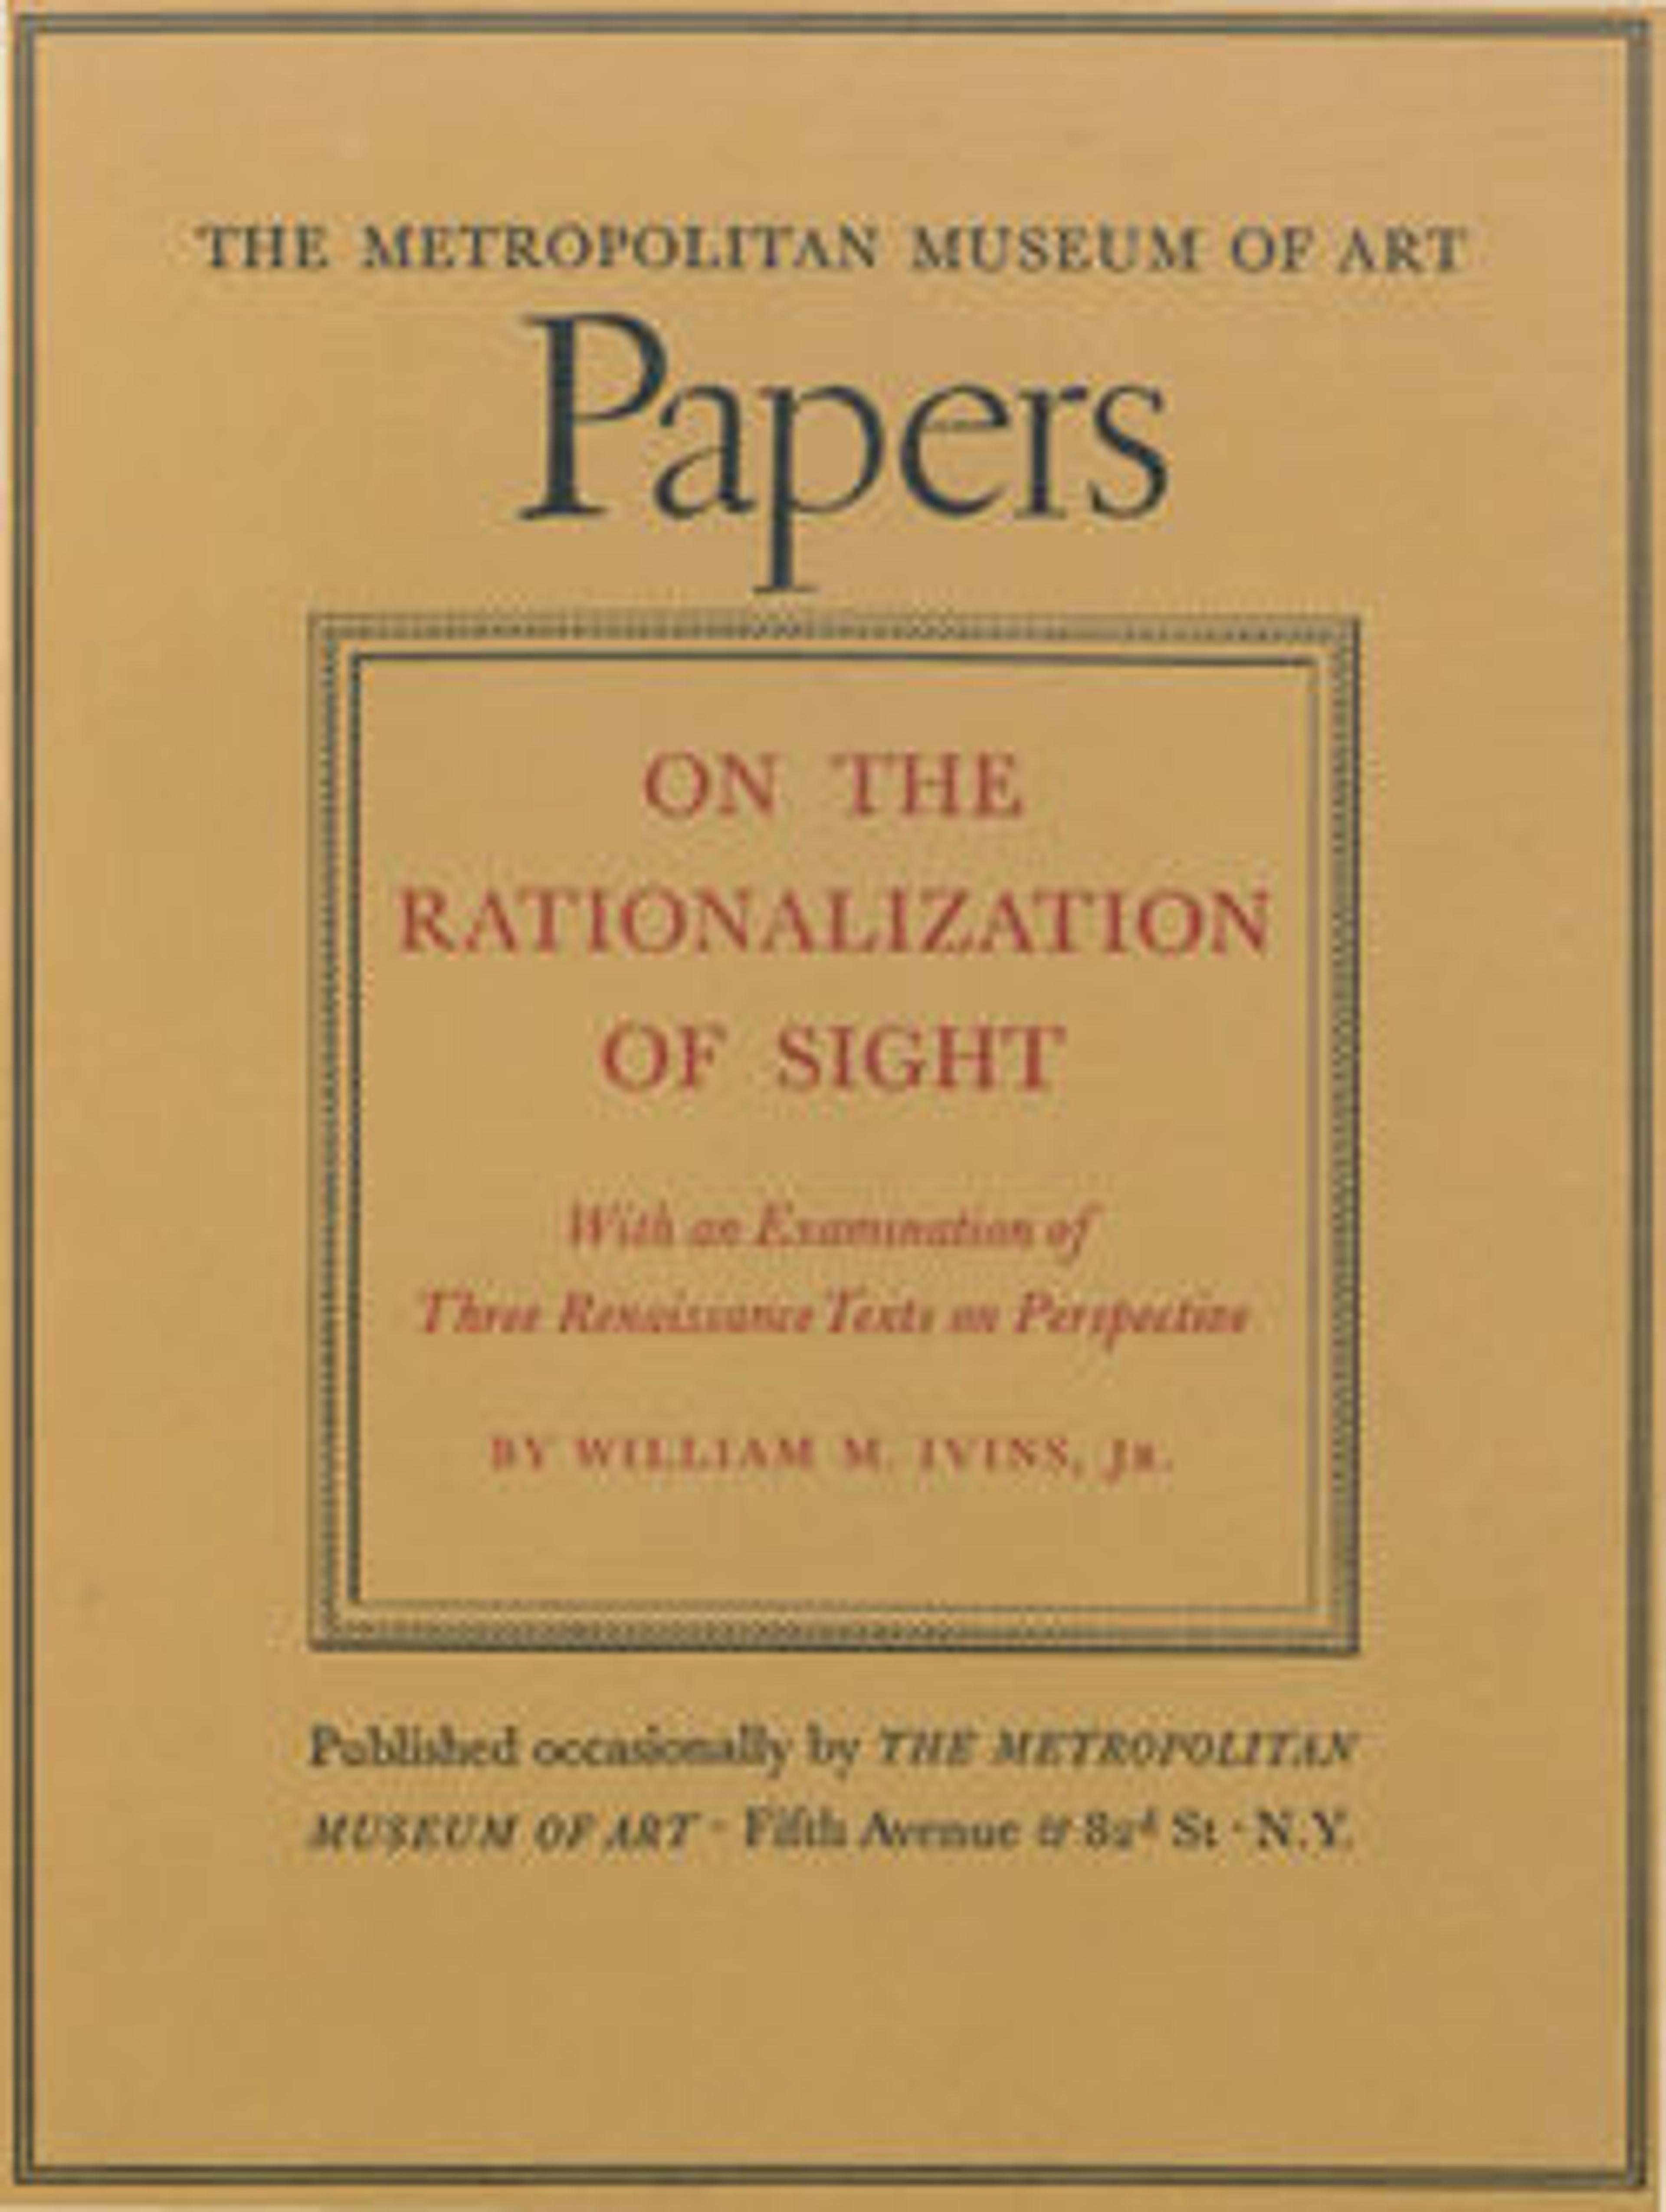 Papers: On the Rationalization of Sight